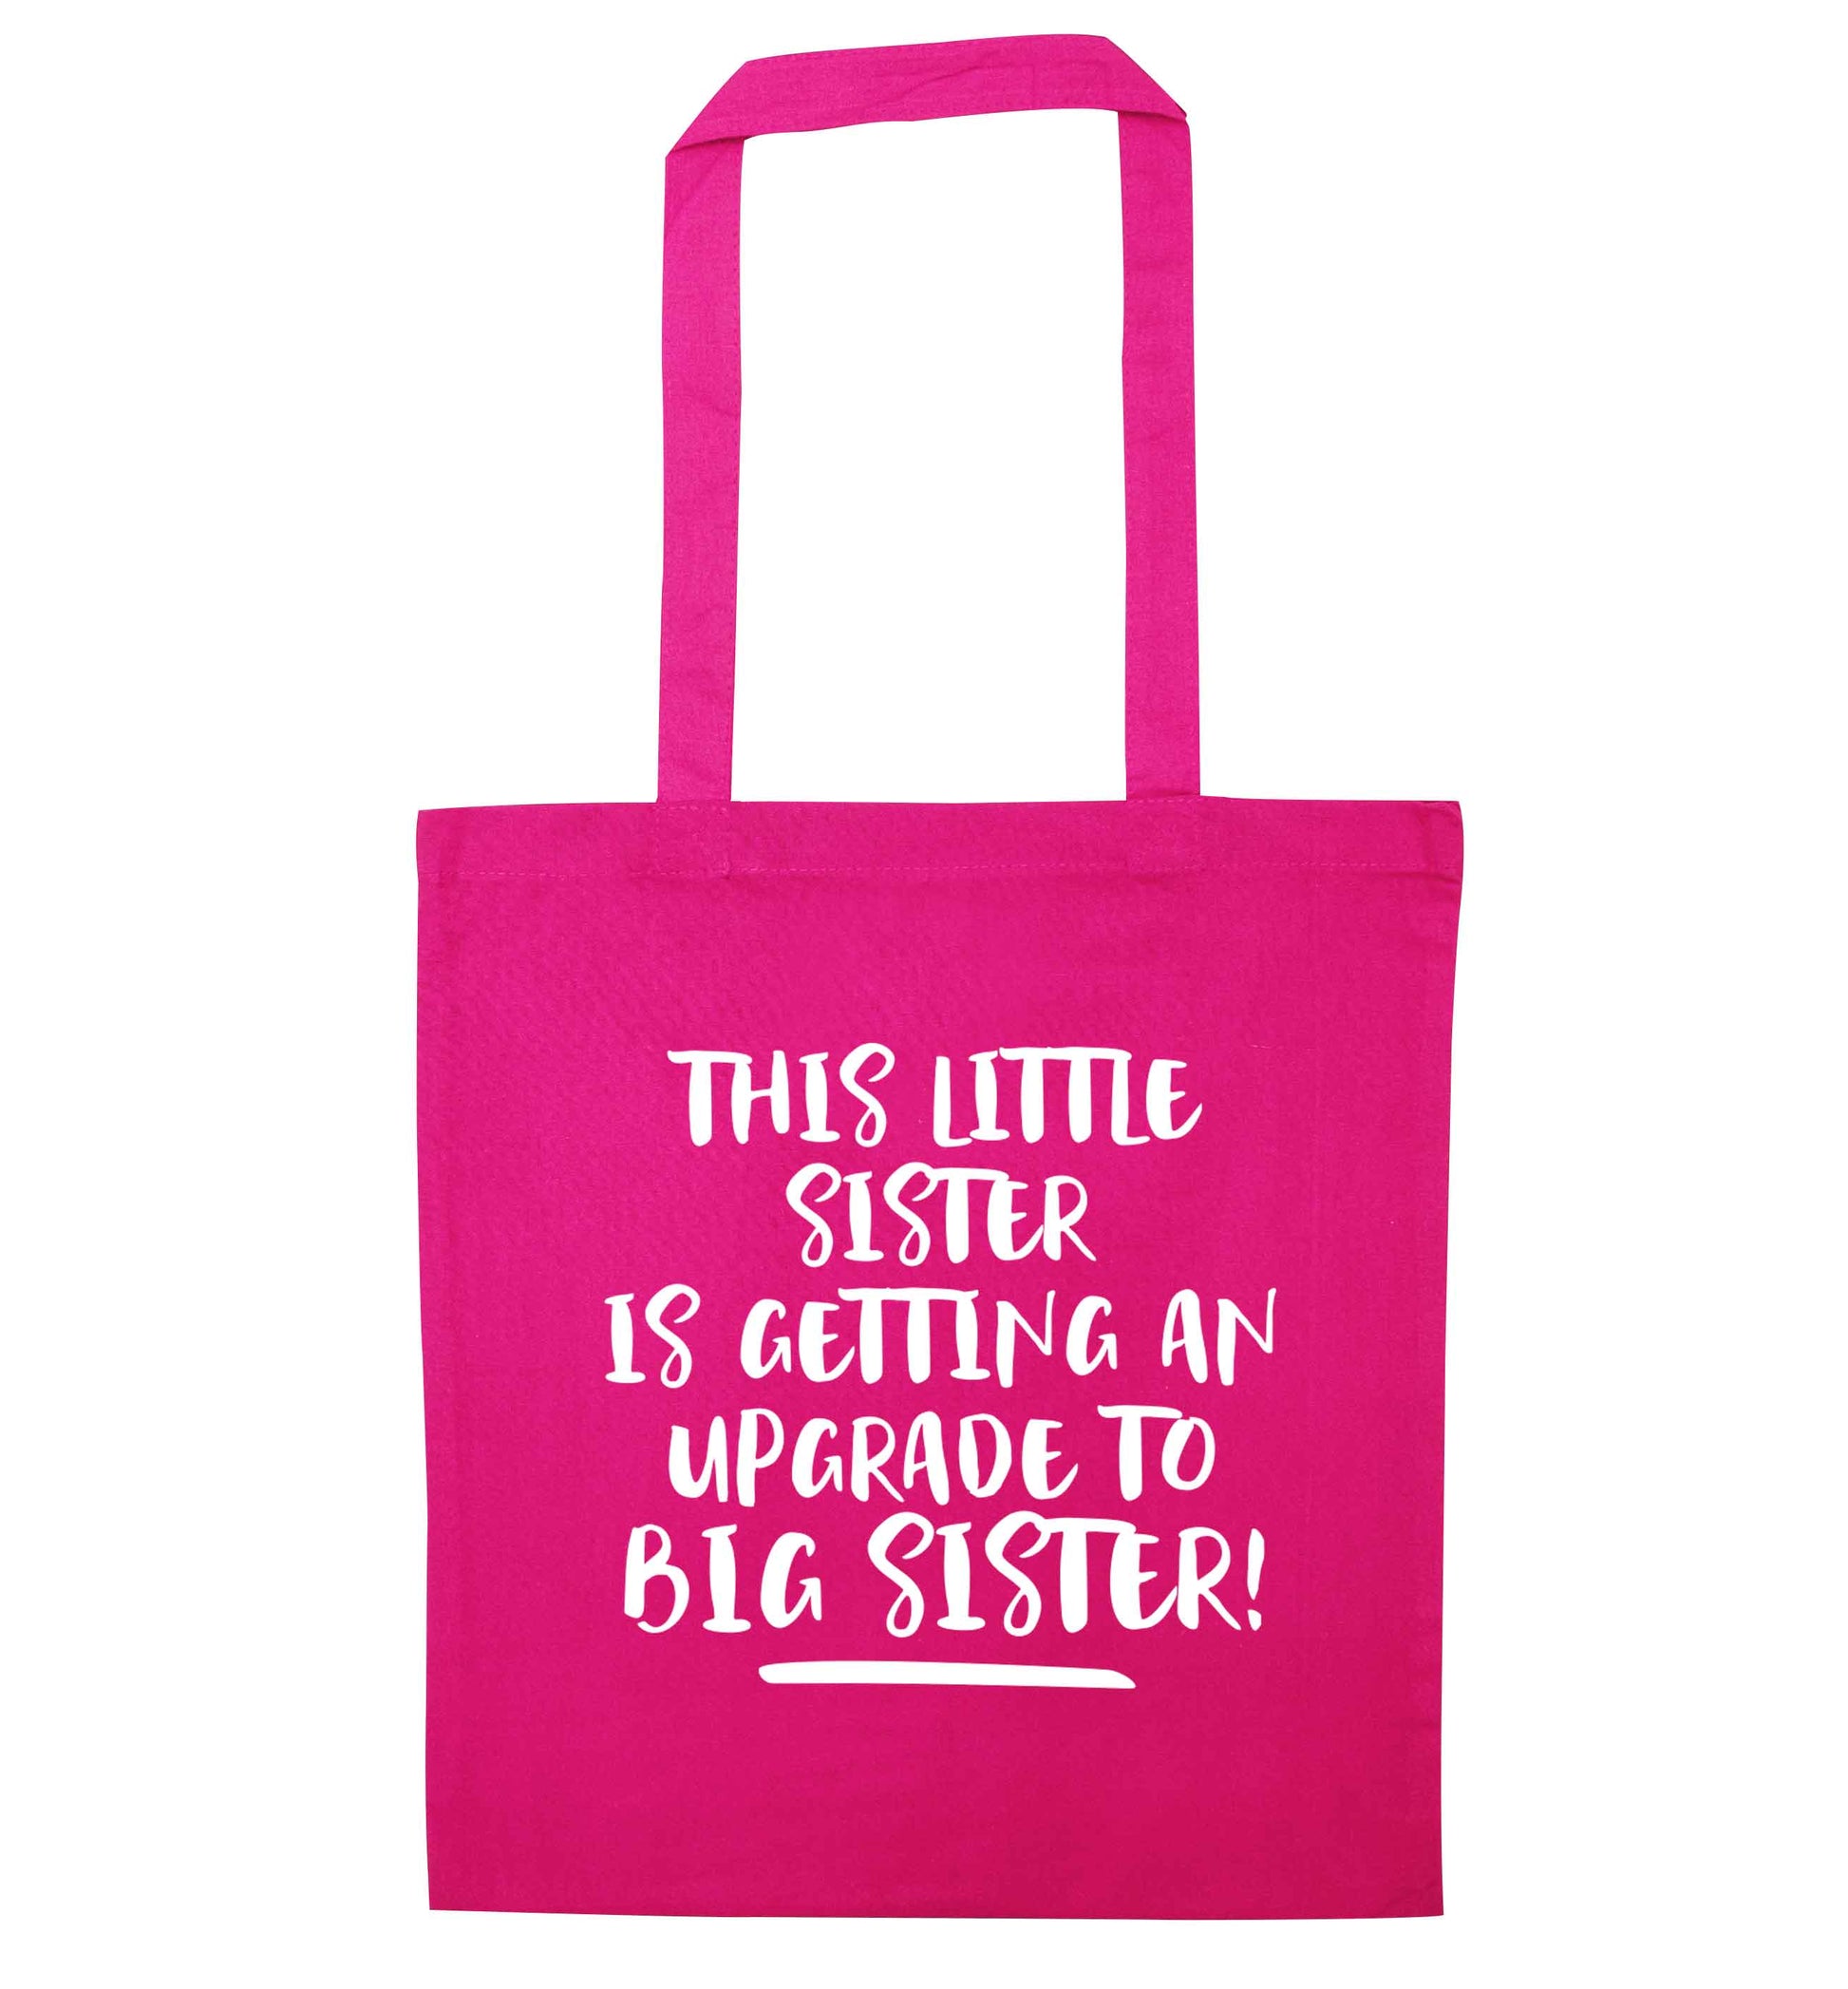 This little sister is getting an upgrade to big sister! pink tote bag